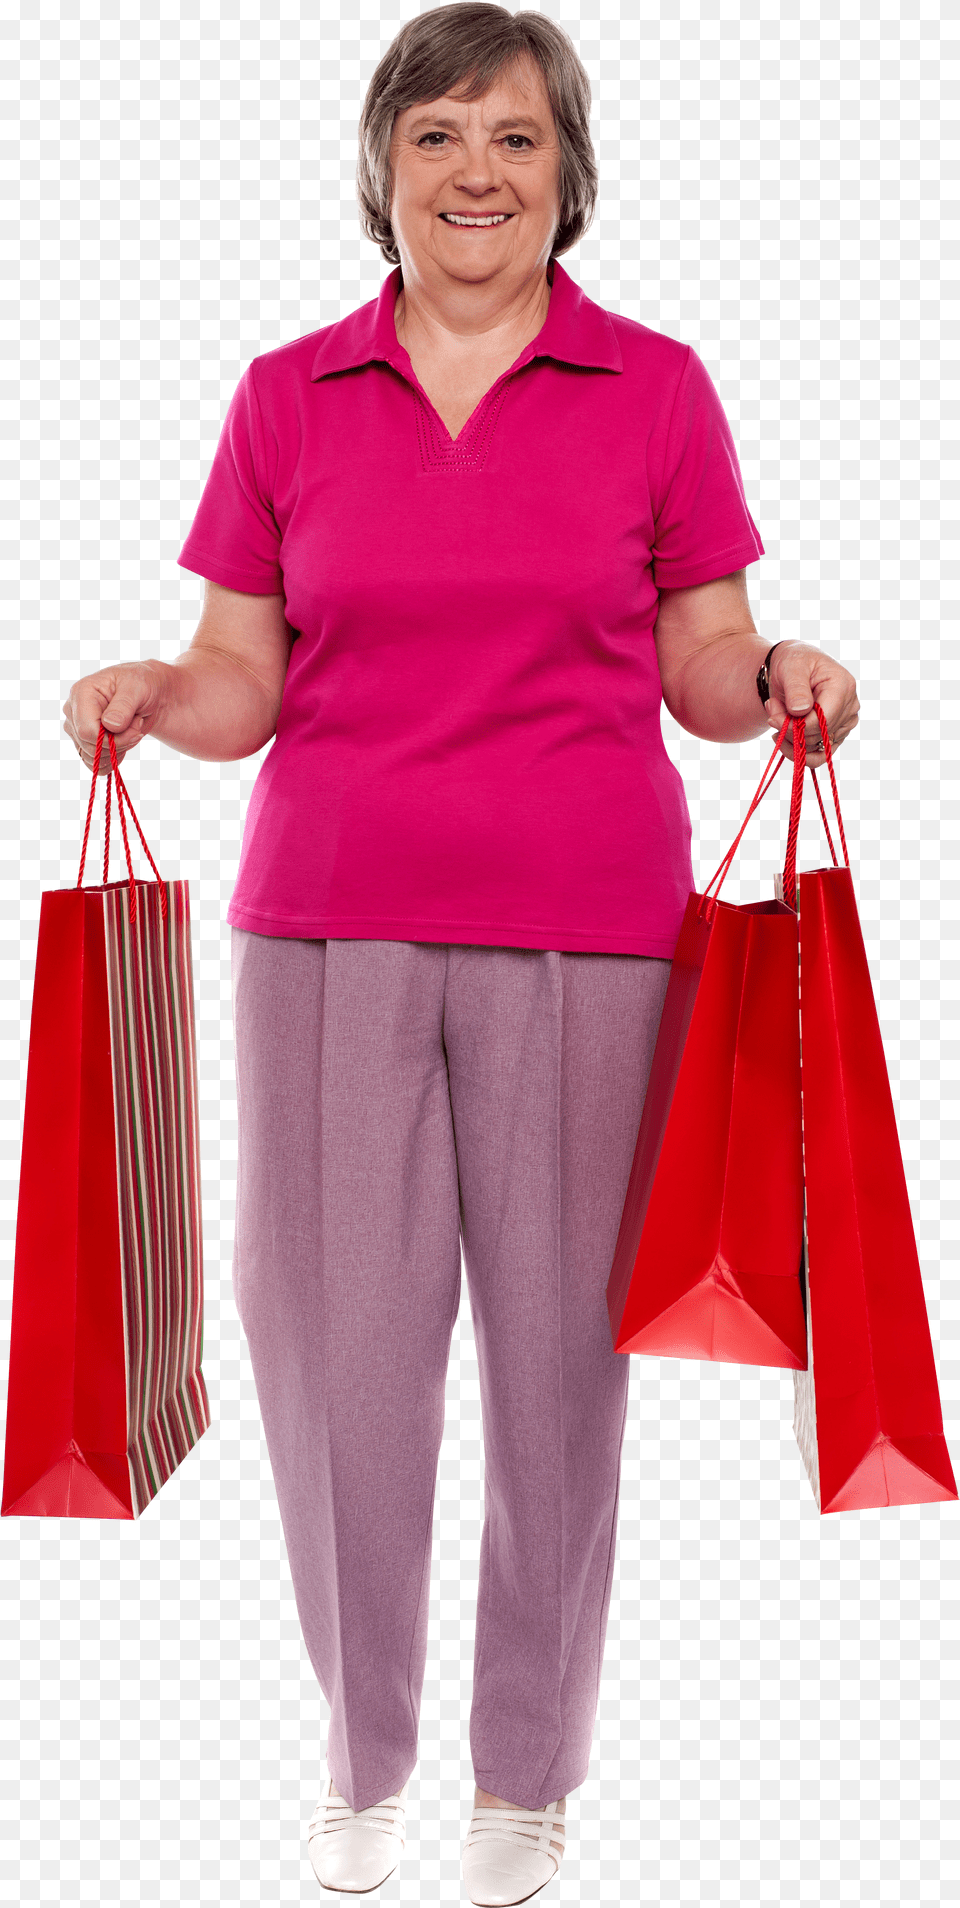 People Shopping Holding Bag Royalty Bag, Cushion, Home Decor, Pillow, Diaper Free Png Download